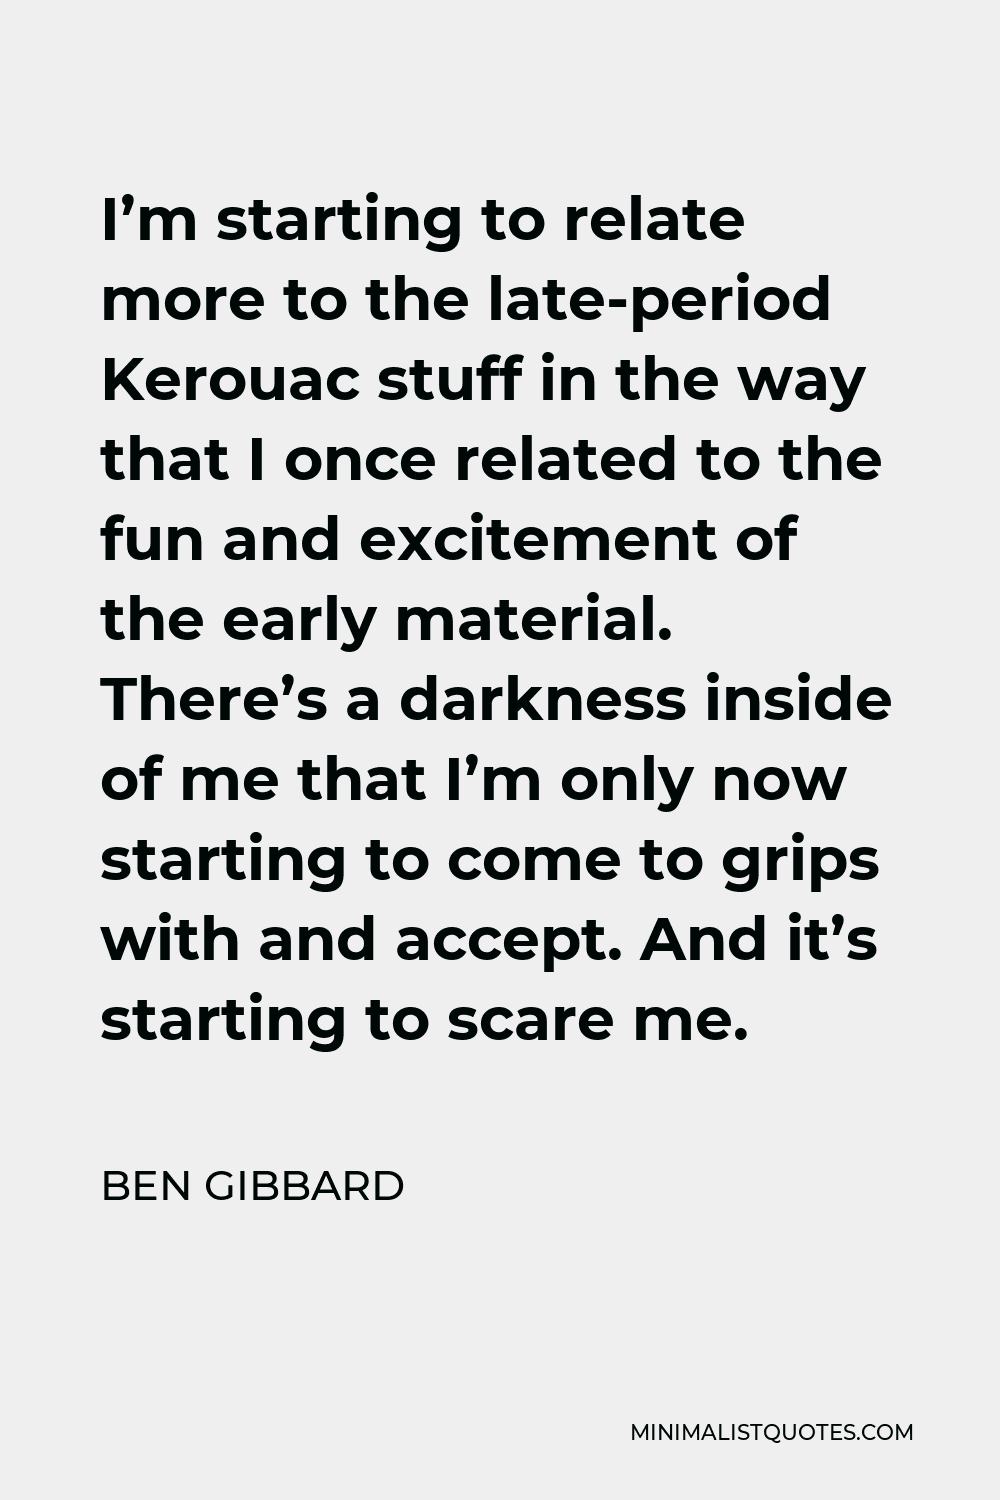 Ben Gibbard Quote - I’m starting to relate more to the late-period Kerouac stuff in the way that I once related to the fun and excitement of the early material. There’s a darkness inside of me that I’m only now starting to come to grips with and accept. And it’s starting to scare me.